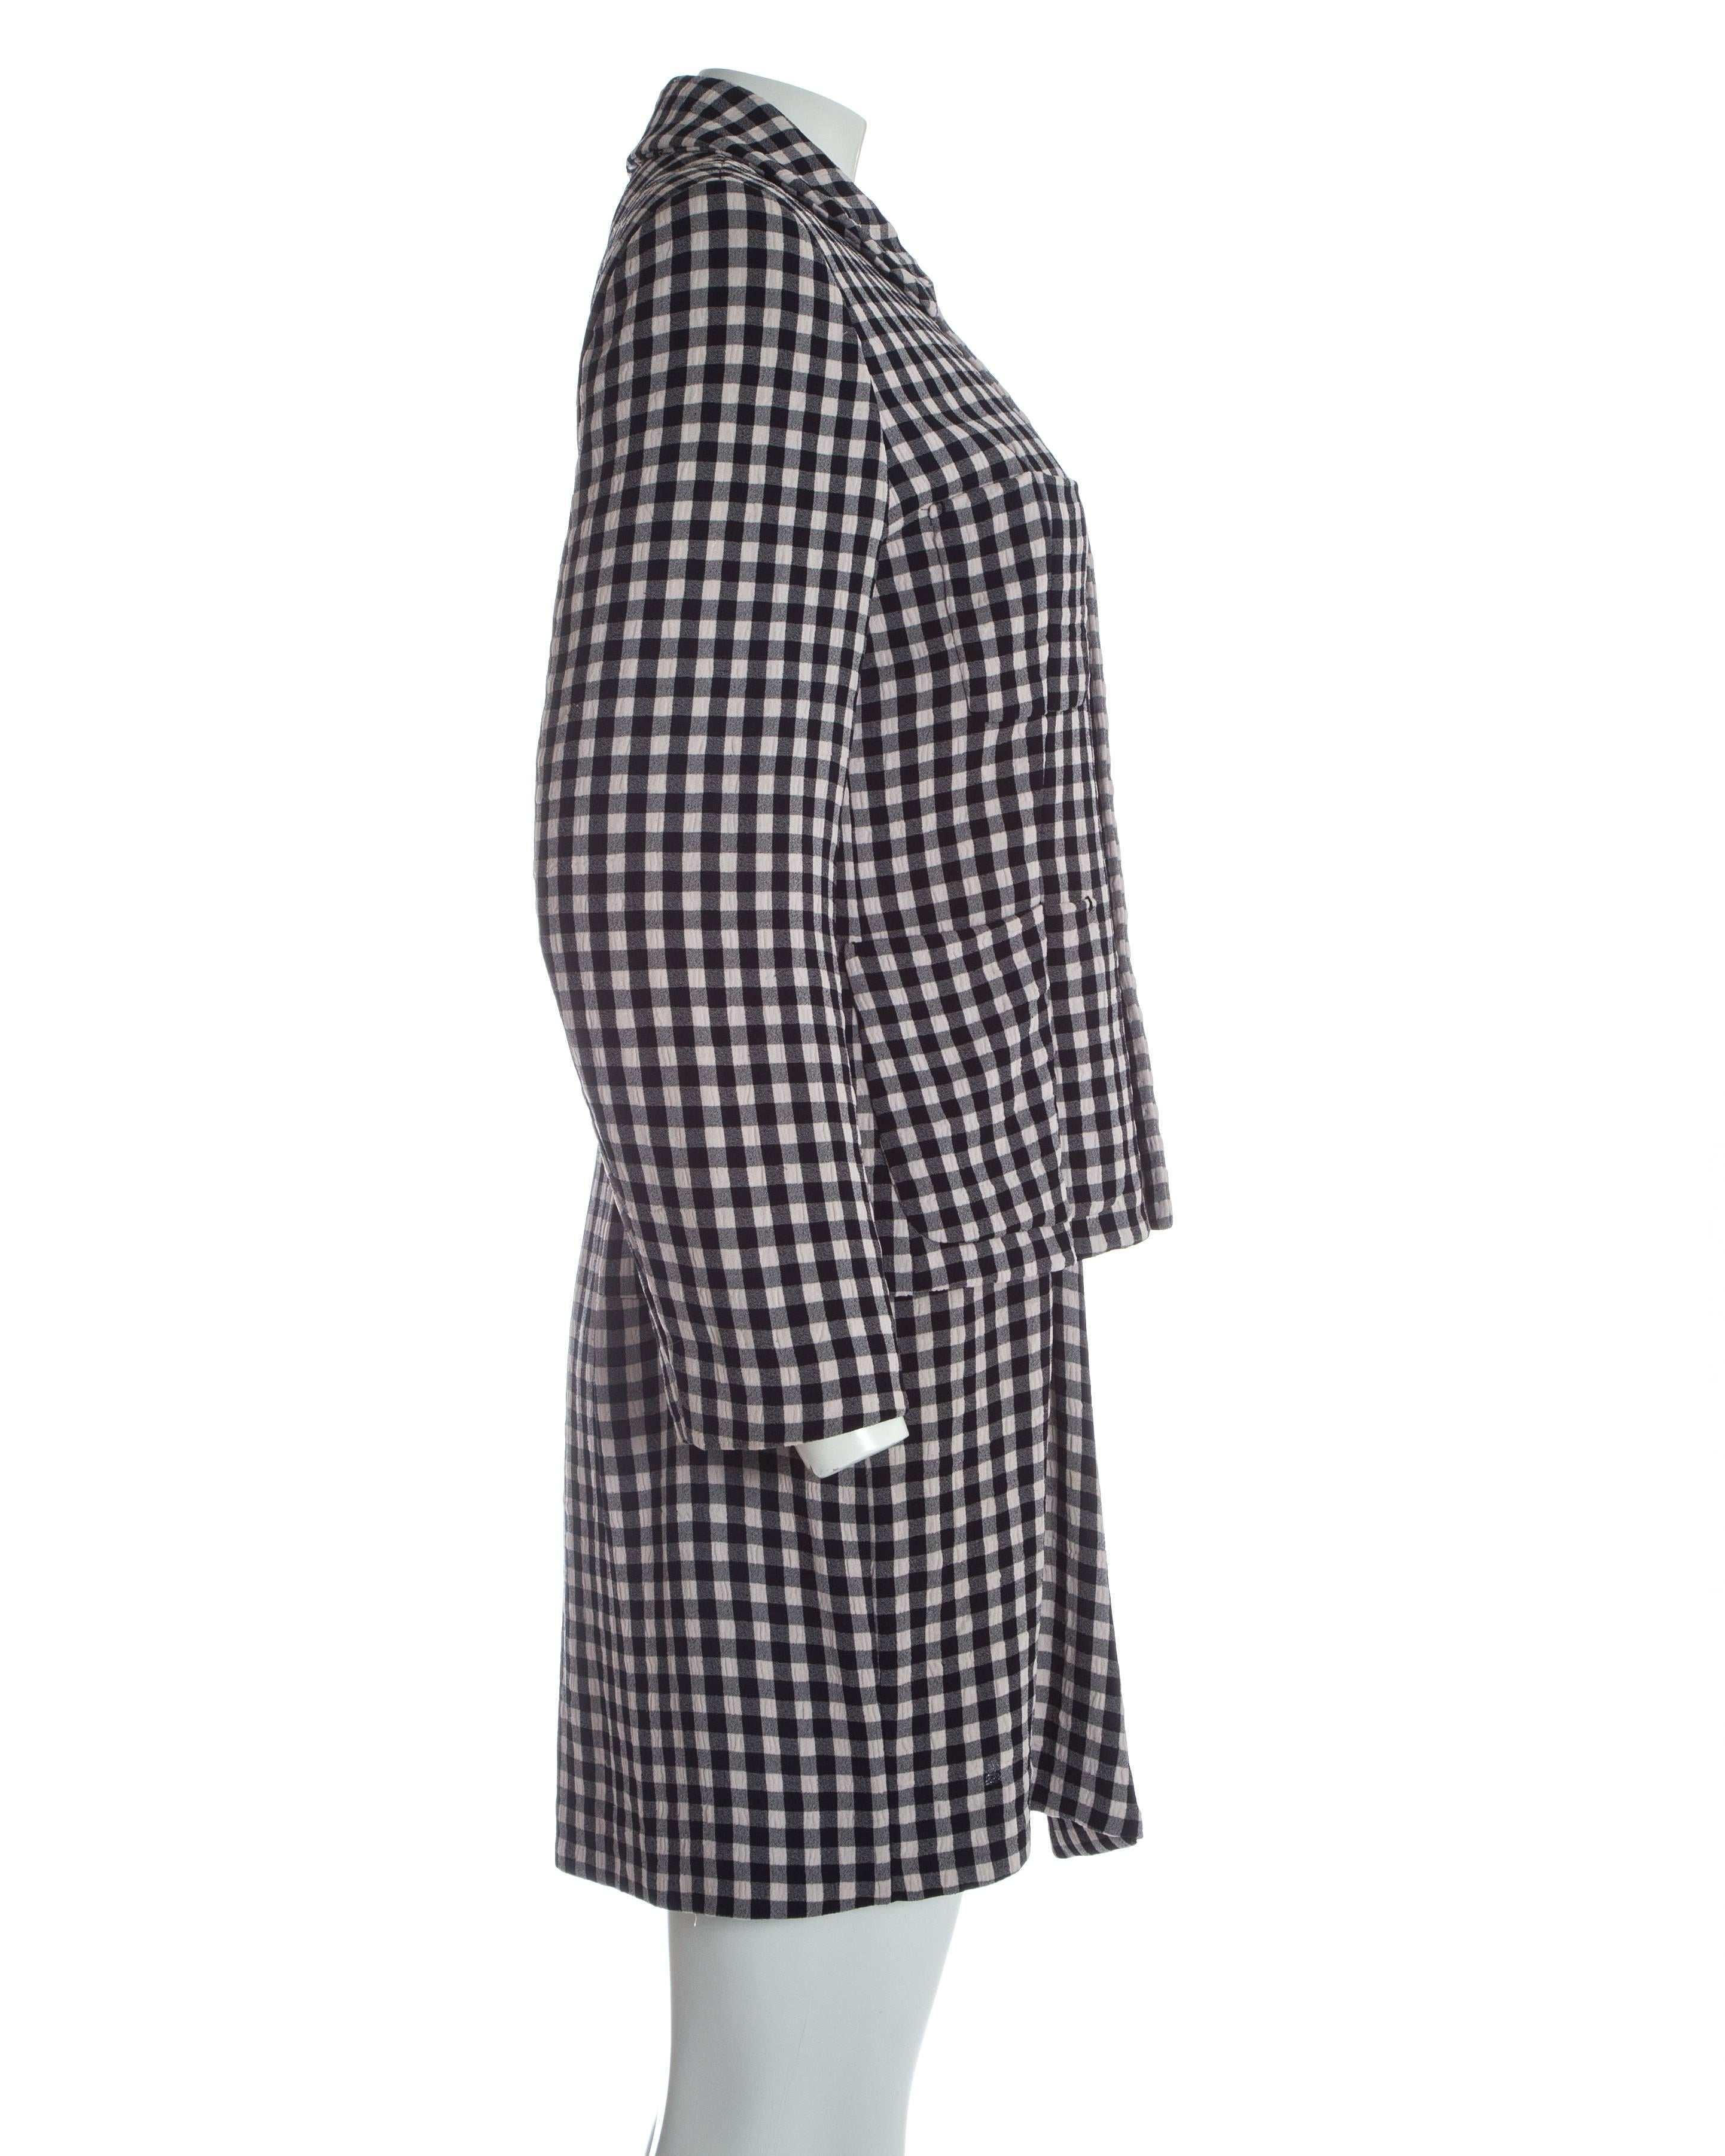 Comme des Garcons gingham crepe shirt dress, A / W 1995 In Excellent Condition For Sale In London, GB